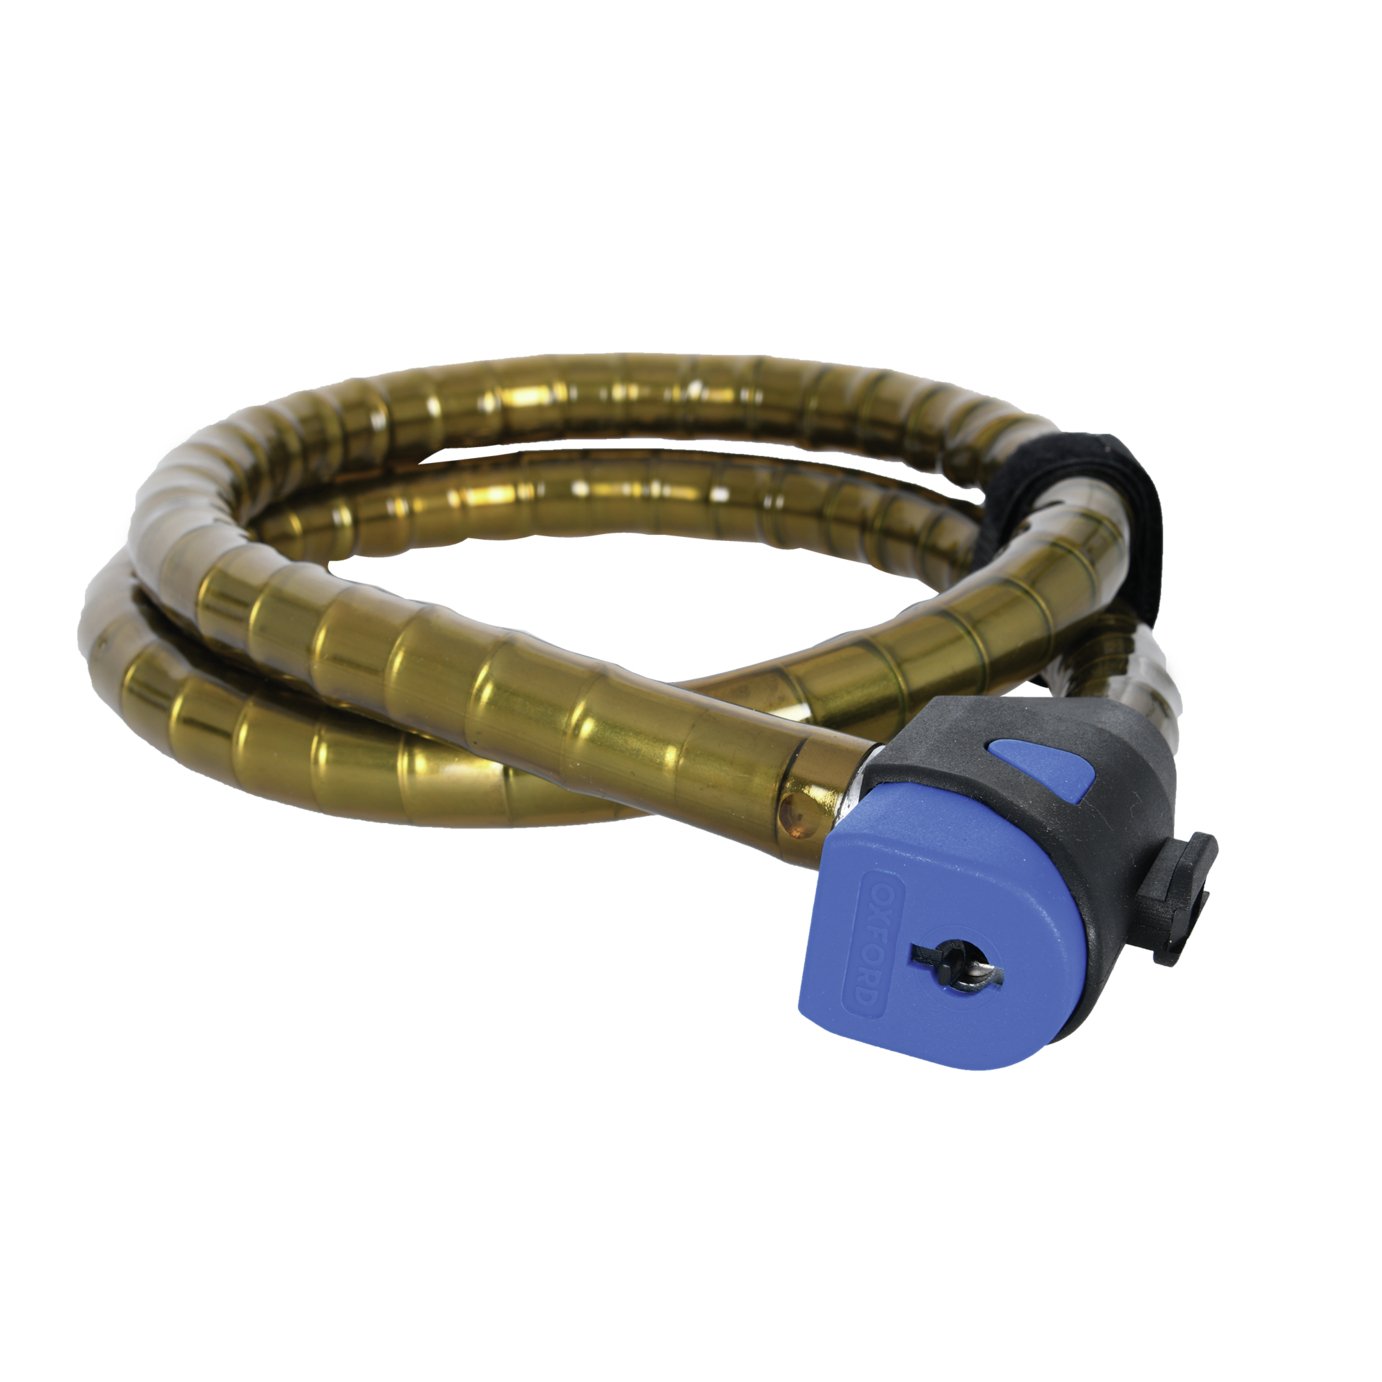 oxford barrier armoured cable lock